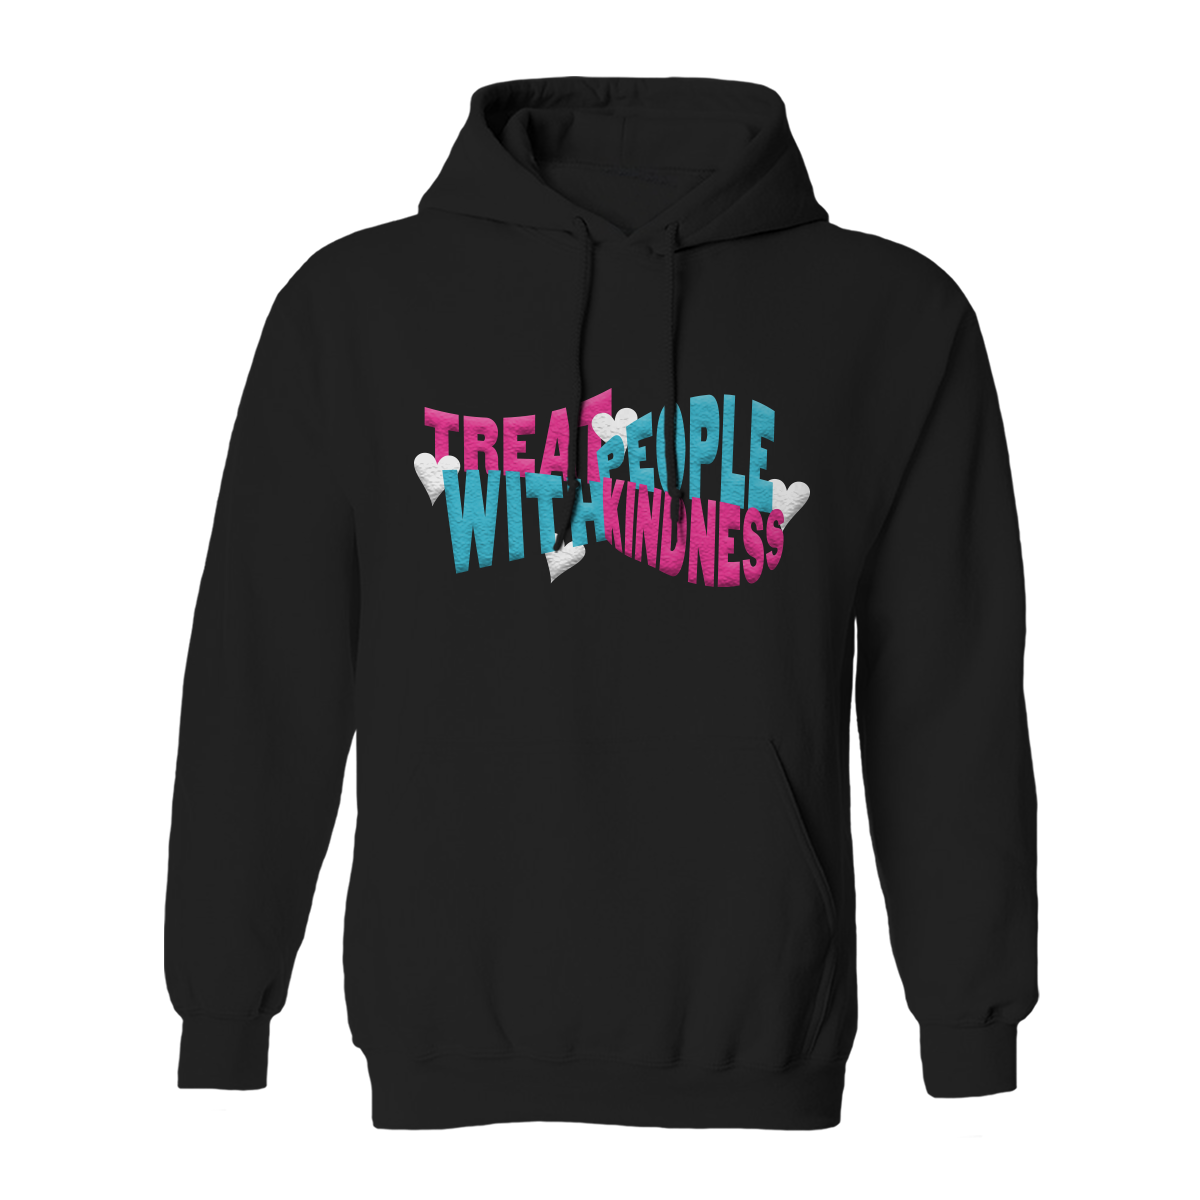 TREAT PEOPLE WITH KINDNESS BLUE HOODIE